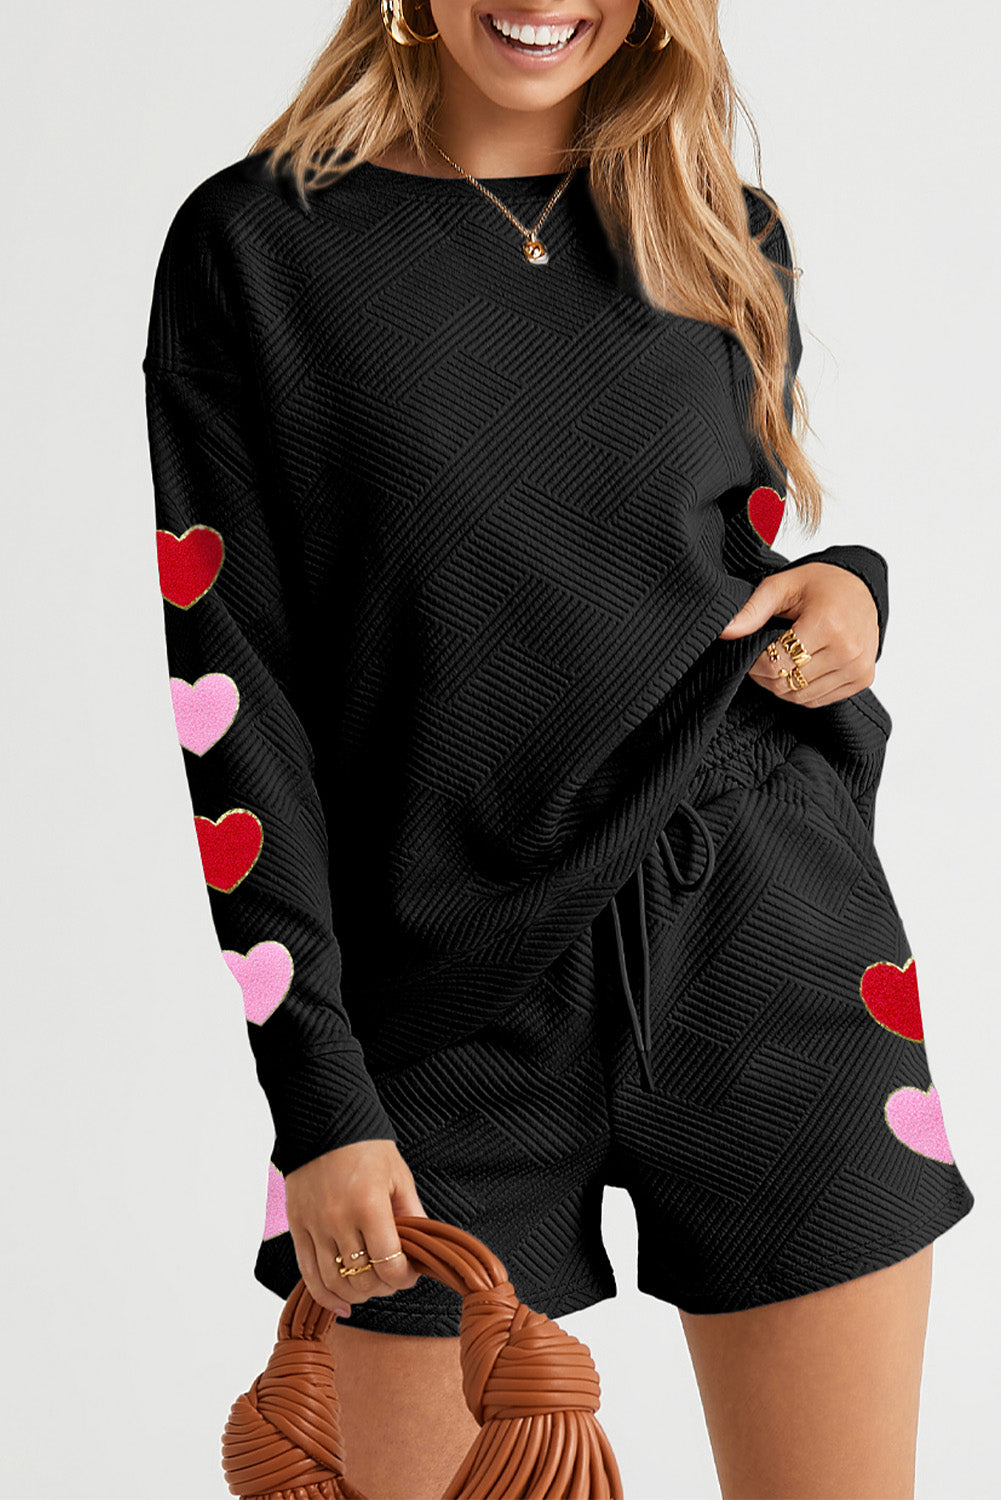 LC625823-2-S, LC625823-2-M, LC625823-2-L, LC625823-2-XL, LC625823-2-2XL, Black Heart Chenille Patch Long Sleeve Top and Shorts Textured 2pcs Set